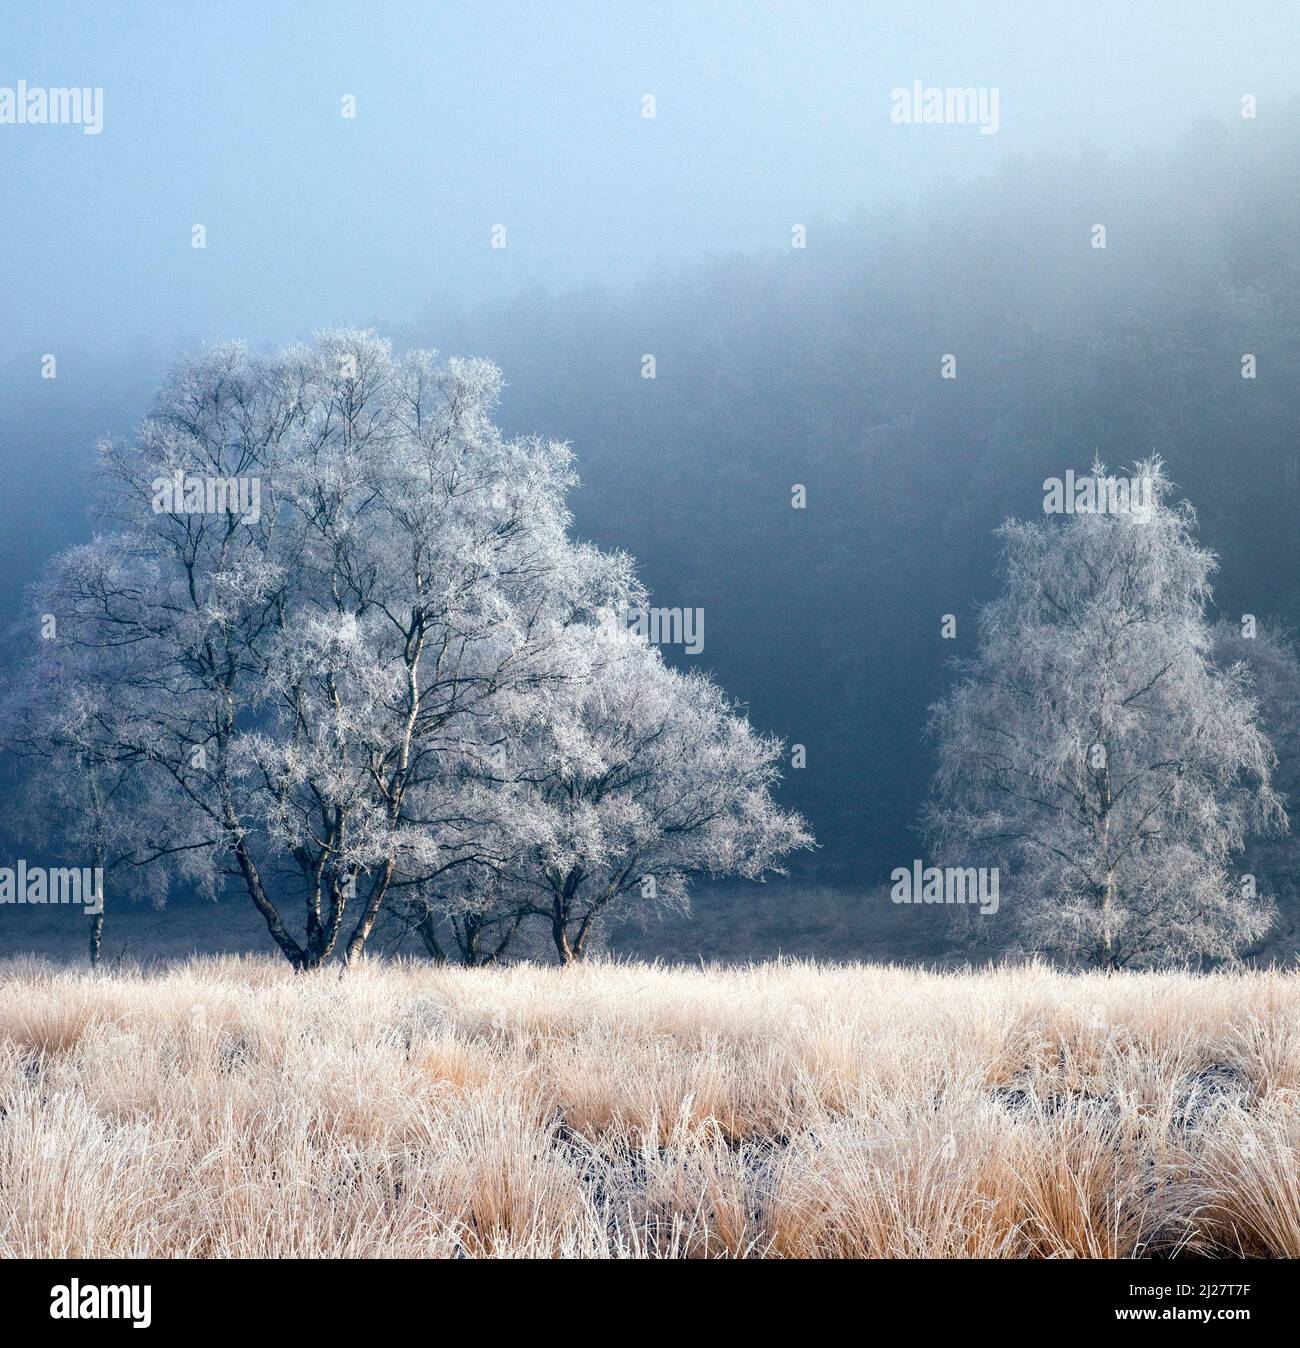 Severe frost with fog and mist in mid-winter Cannock Chase Country Park AONB (area of outstanding natural beauty) in Staffordshire England UK Stock Photo